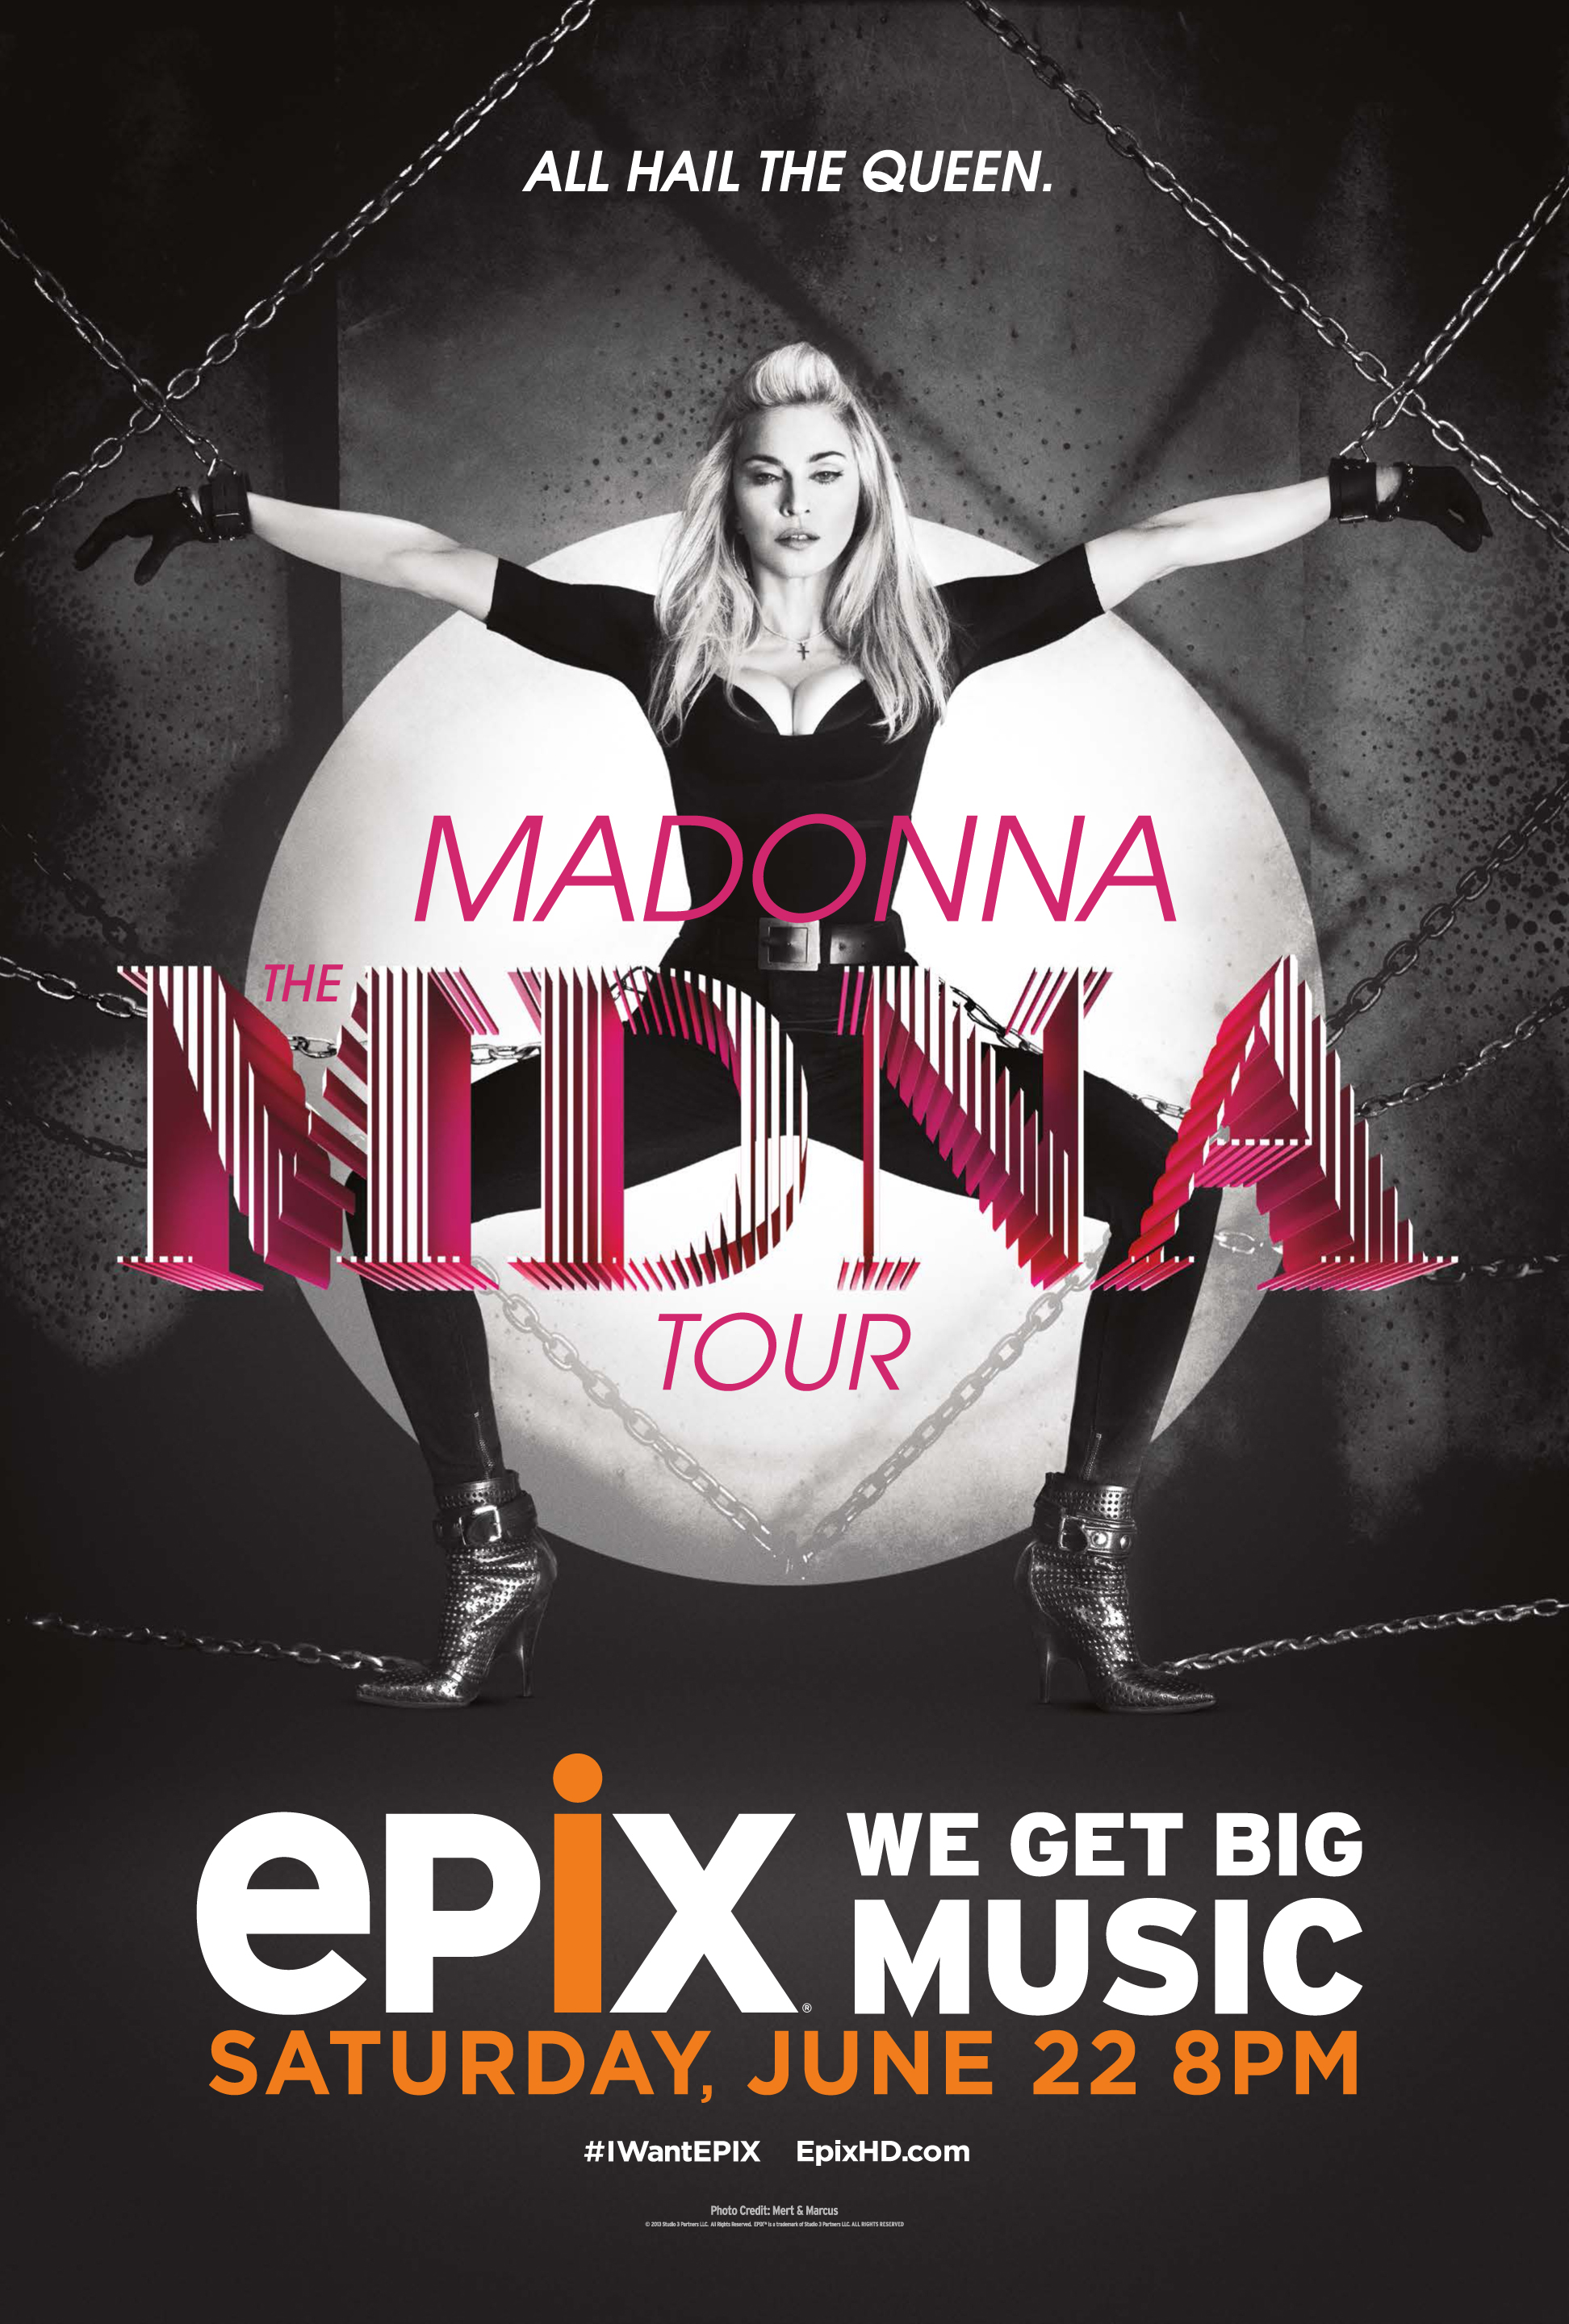 20130509-pictures-madonna-mdna-tour-epix-poster-hq.jpg